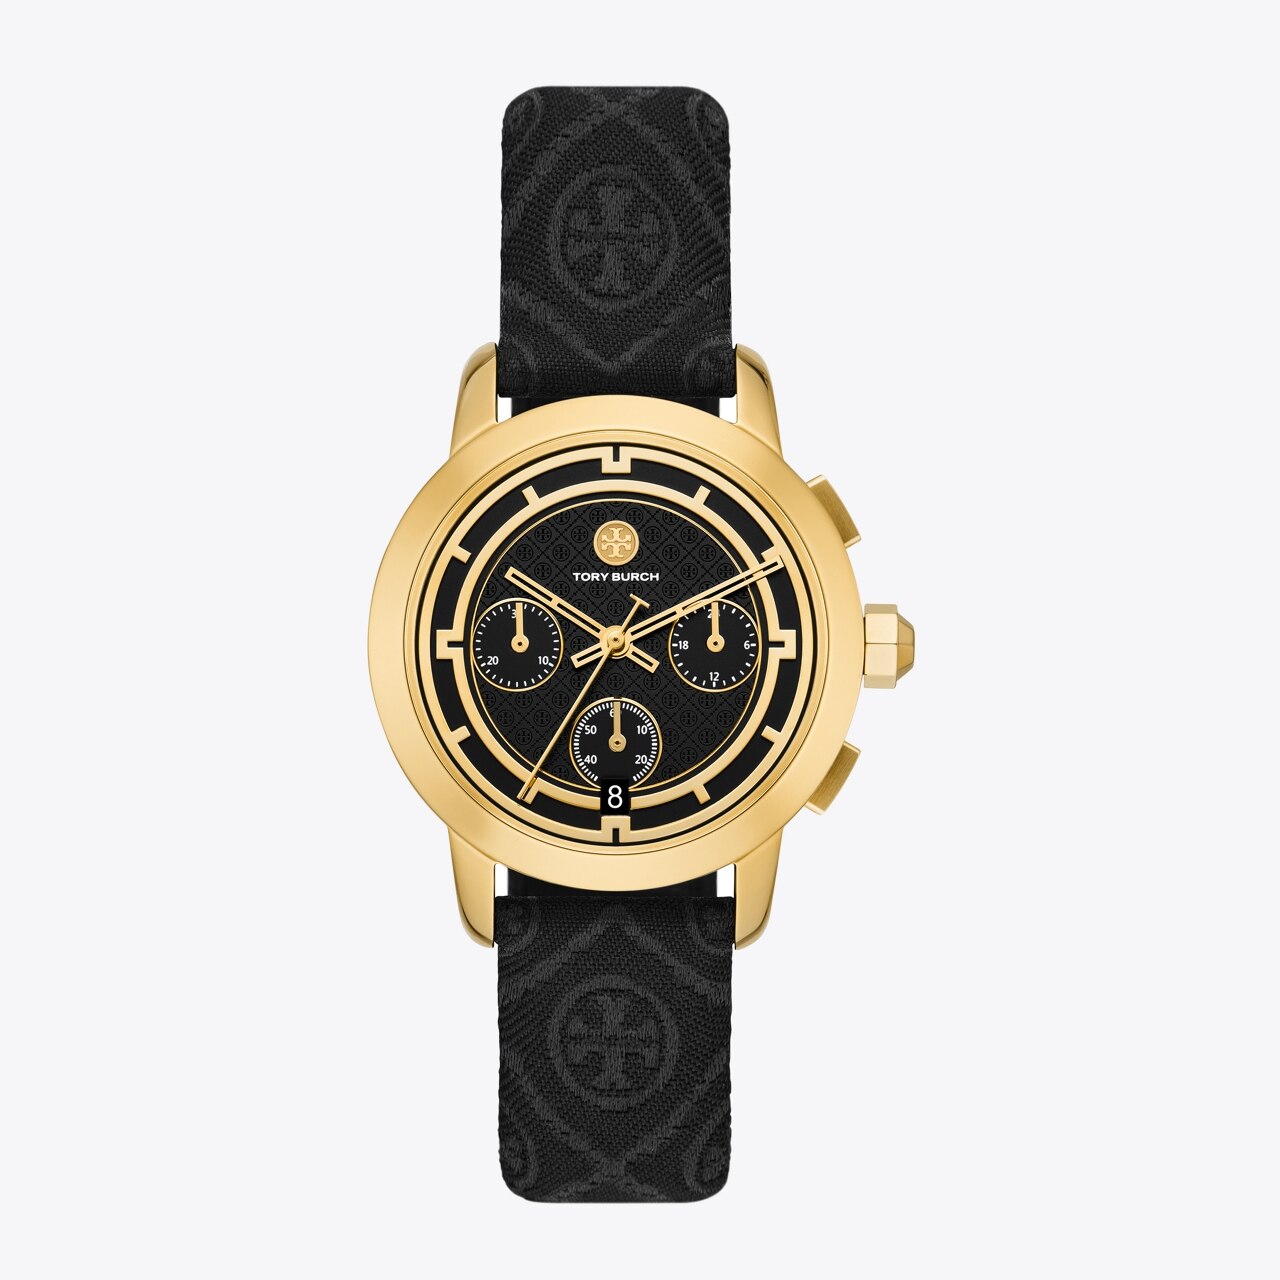 Tory Burch THE ROBINSON - Watch -  gold-coloured/silver-coloured/gold-coloured 